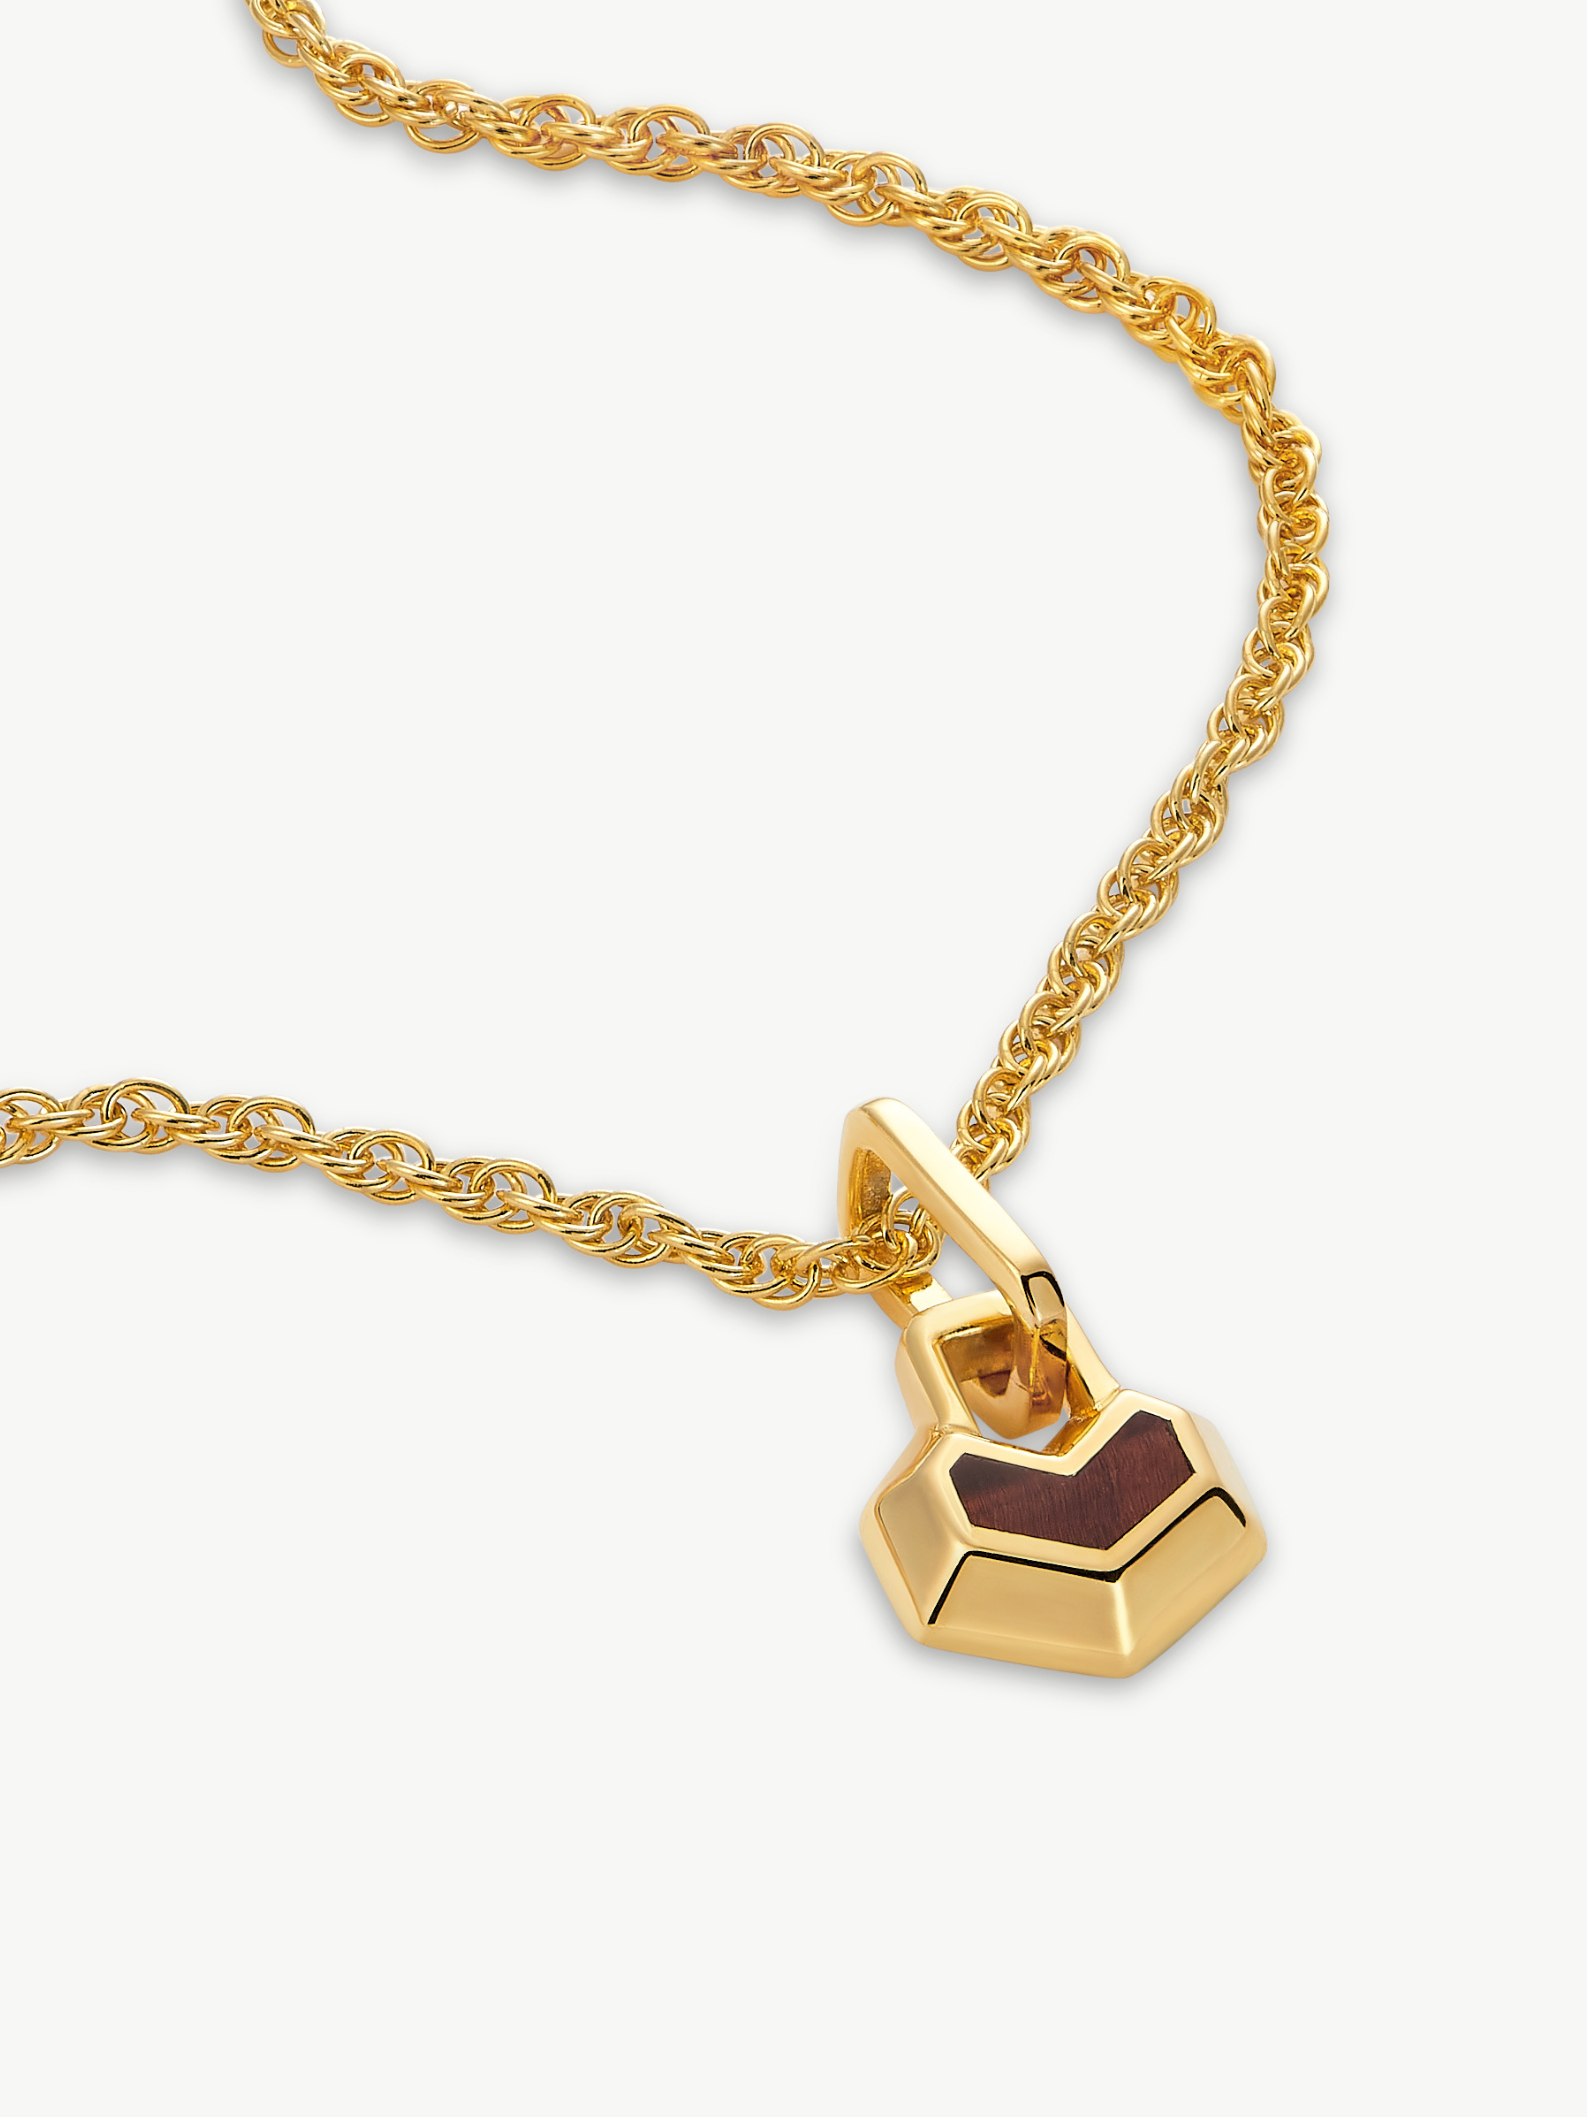 MINI DARYL NECKLACE 22" CHAIN <br> 18k Gold Plated - Red Tiger Eye